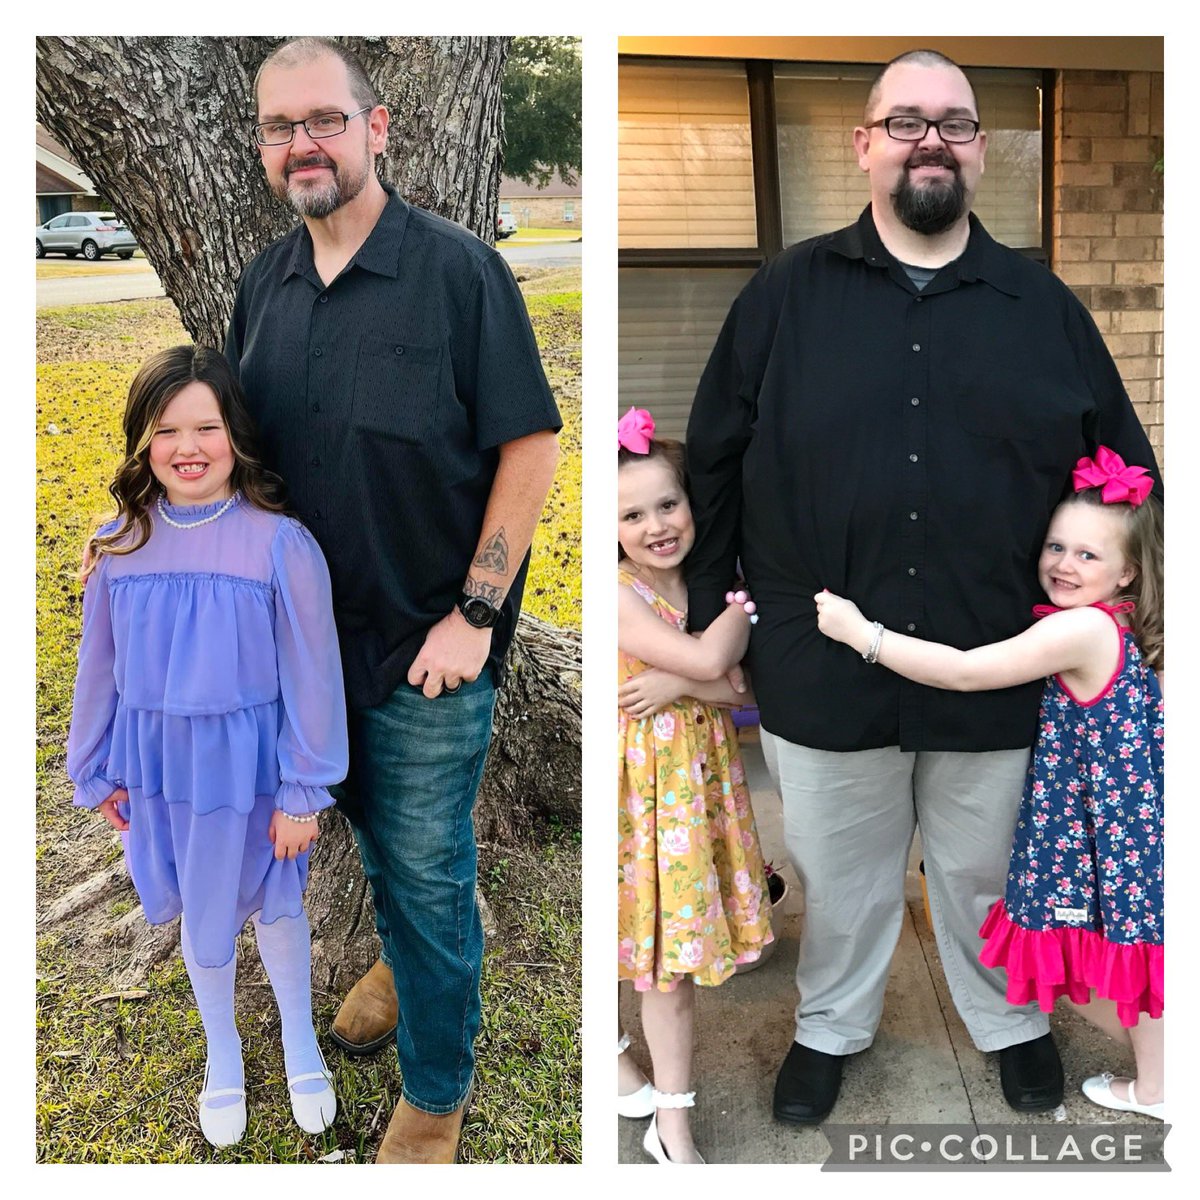 Daddy daughter dance. One pic from a handful of years ago with my two oldest  and one today with my youngest.

#nsng #nosugarnograins #keto #lowcarb #lowcarb #carnivore #ketobrick #ketobrickfam #oncloudrunning #oncloudshoes #ultrafat #ultrasalt #nsngfoods #lessofmewithnsng